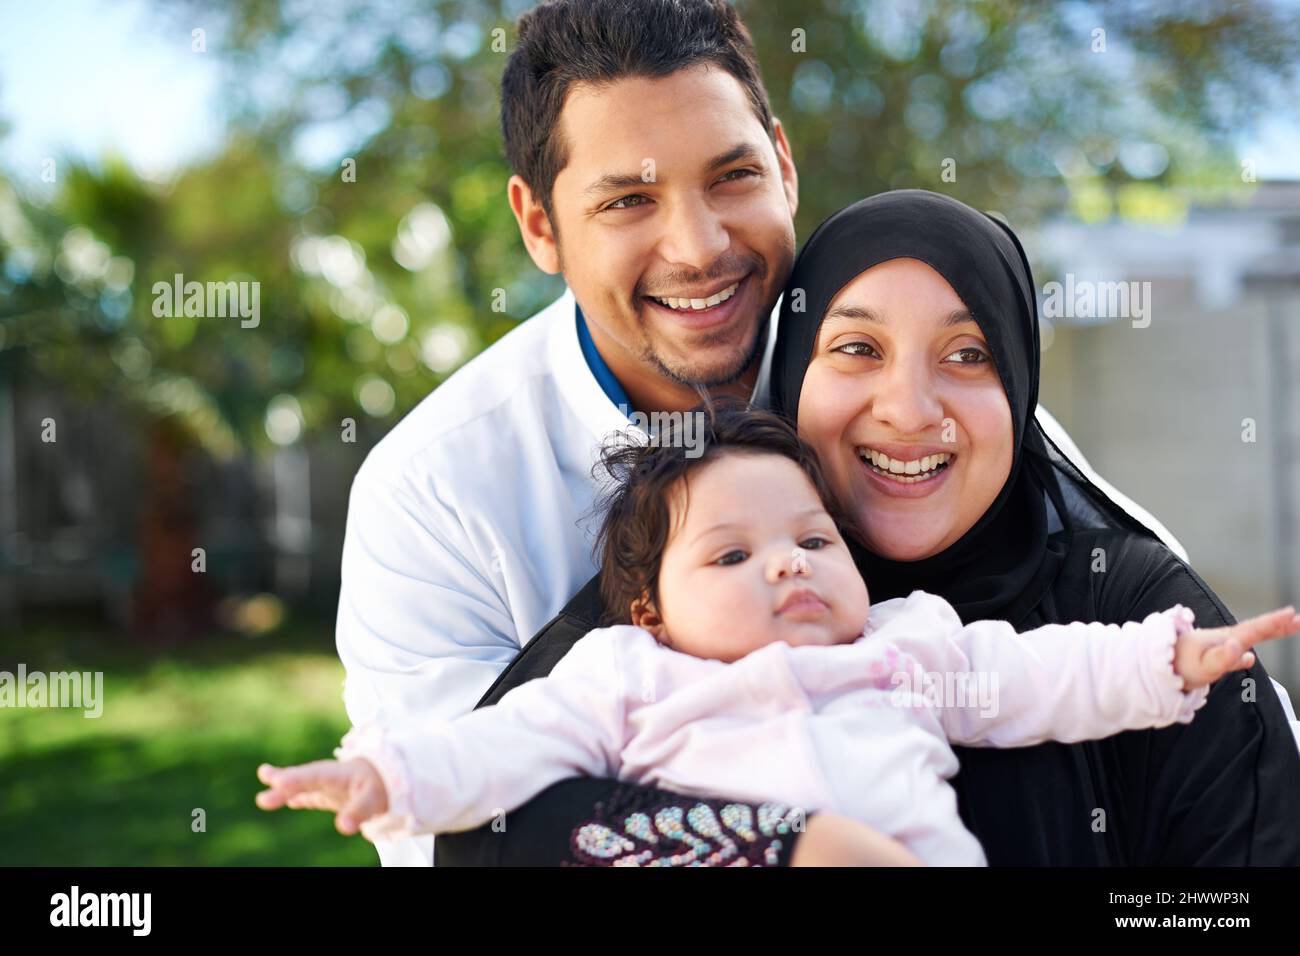 Were a blessed family. Portrait of a muslim family enjoying a day outside. Stock Photo